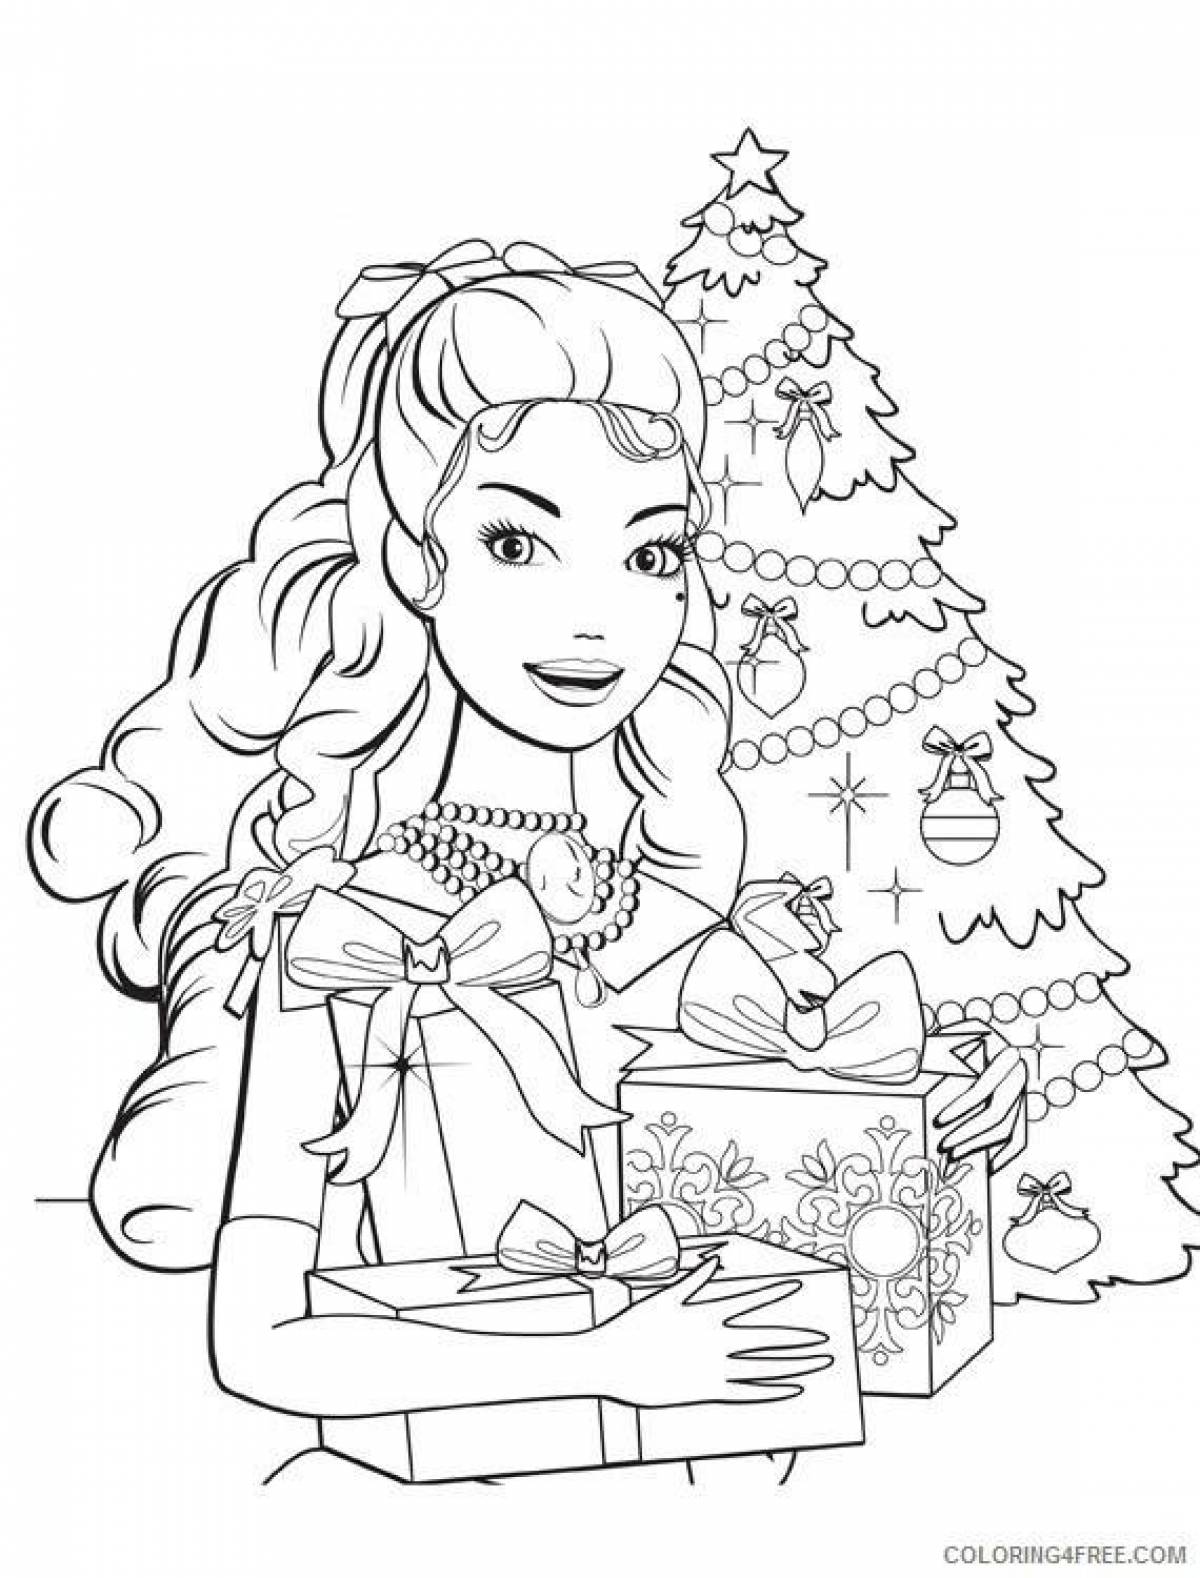 Coloring Pages New 2020 Splendor and Splendor